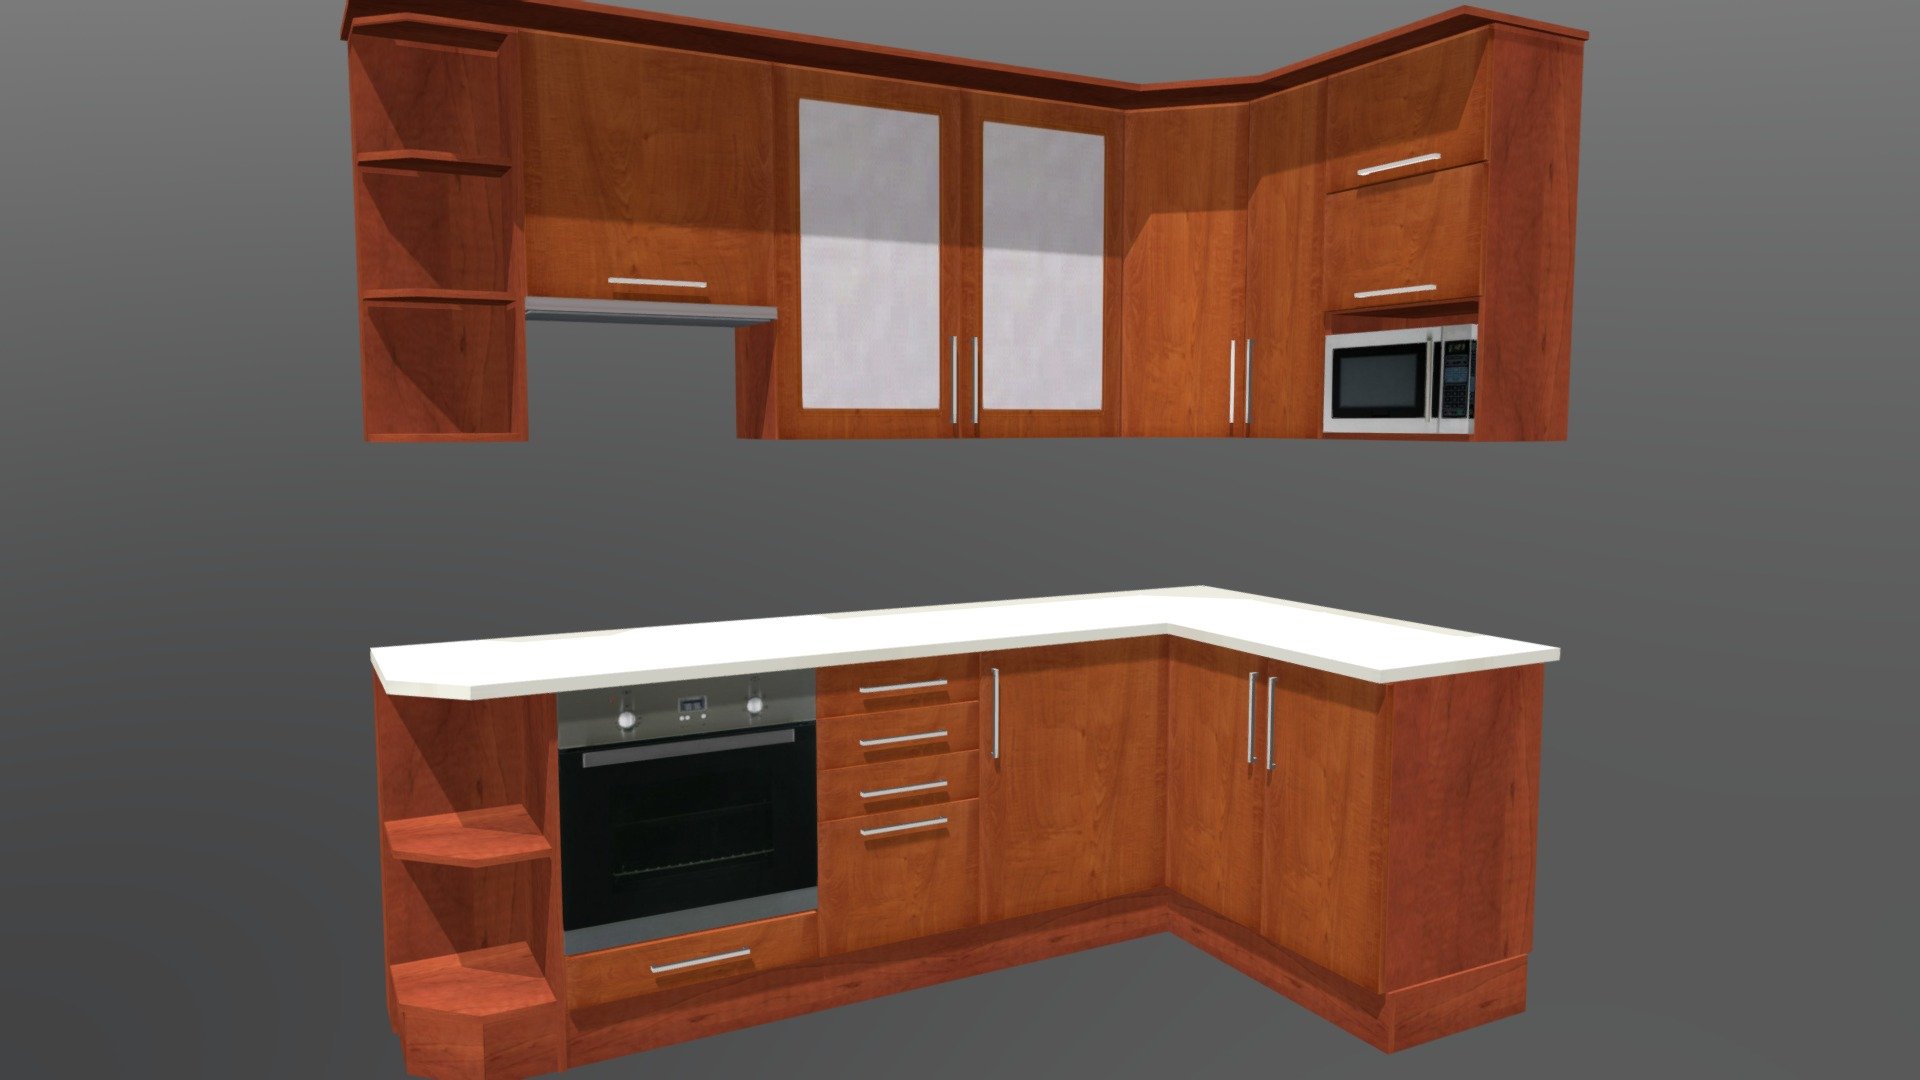 Kitchen cabinet created by free cabinet deisgn software.
The modell can also be downloaded in its original file format.
It also contains the parts list and assembly drawings.
Based on these, the furniture can be built in reality.
The cad software can be downloaded here: http://www.freecabinetcad.com

Az ms_Bútortervező ingyenes programmal készített konyhabútor.
A rajz elérhető az eredeti fájlformátumban is.
A tervező szoftver innen letölthető : http://www.butortervezo.com

L:2560 mm
W:1380 mm
H:2355 mm - Kitchen cabinet 6 - Buy Royalty Free 3D model by ms_Butor (@butortervezo) 3d model